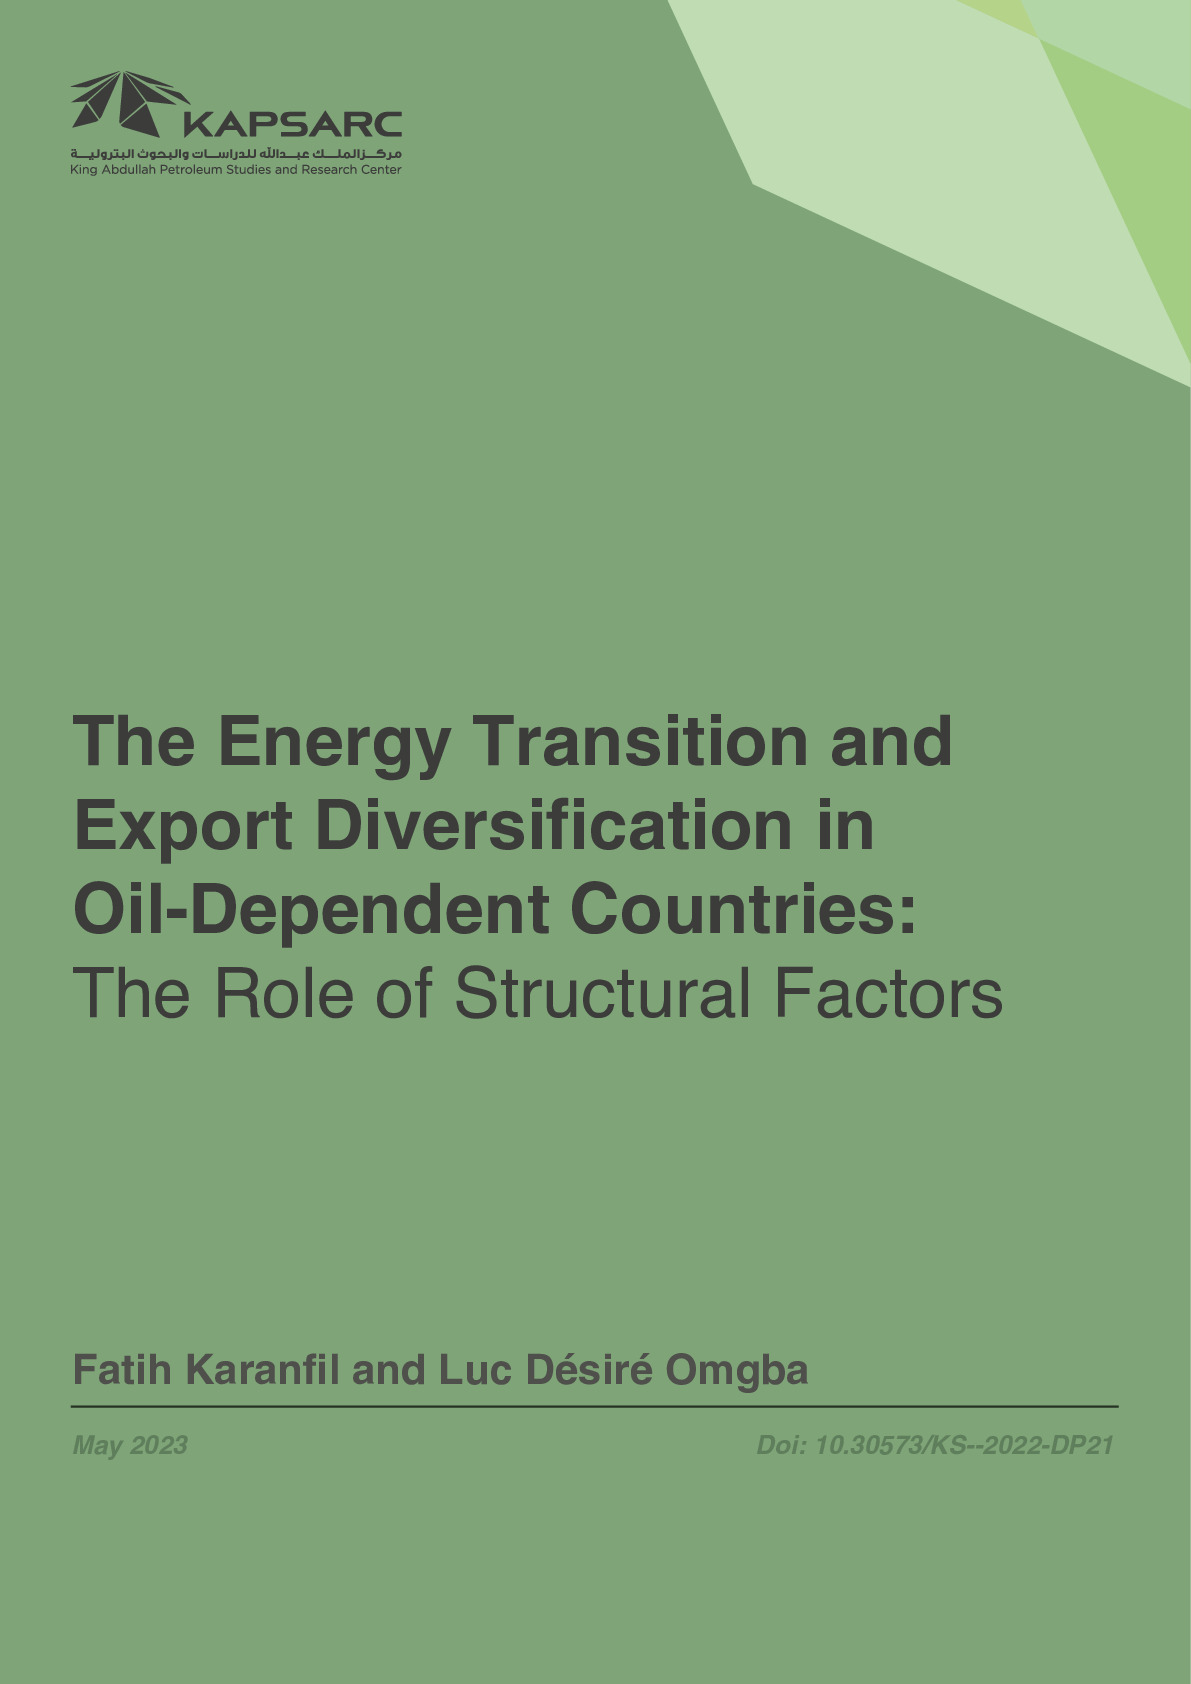 The Energy Transition and Export Diversification in Oil-Dependent Countries: The Role of Structural Factors